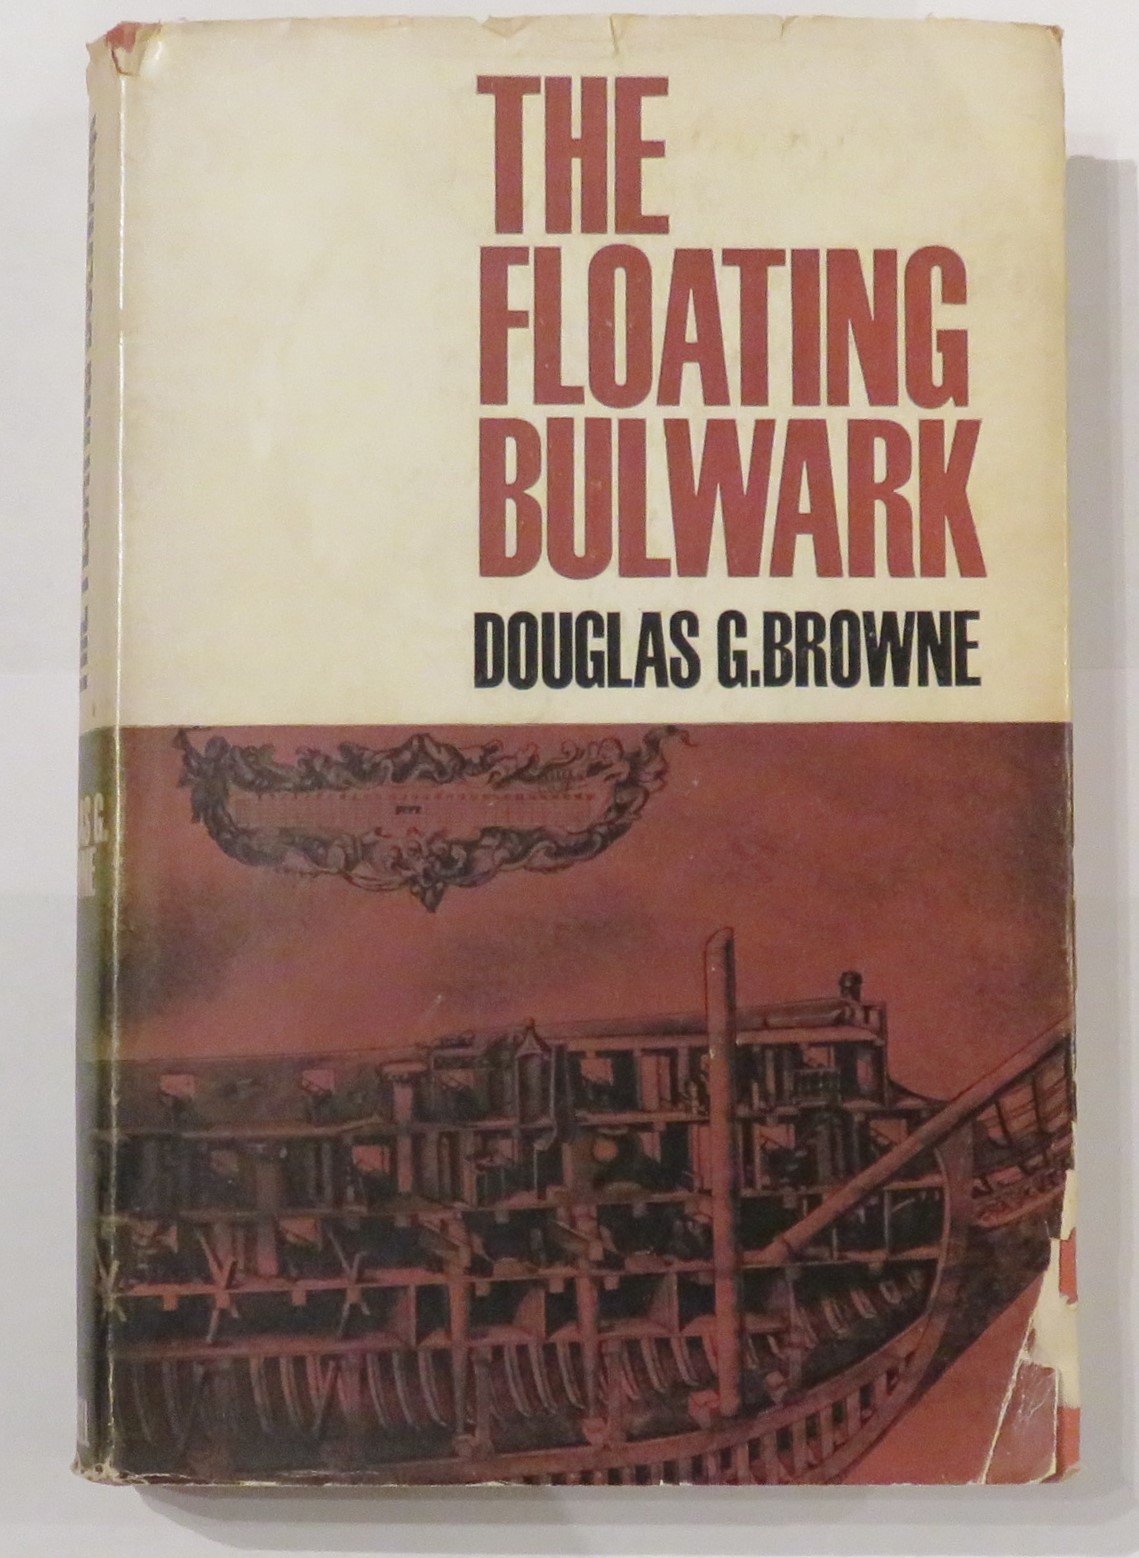 The Floating Bulwark: The Story of the Fighting Ship 1514-1942